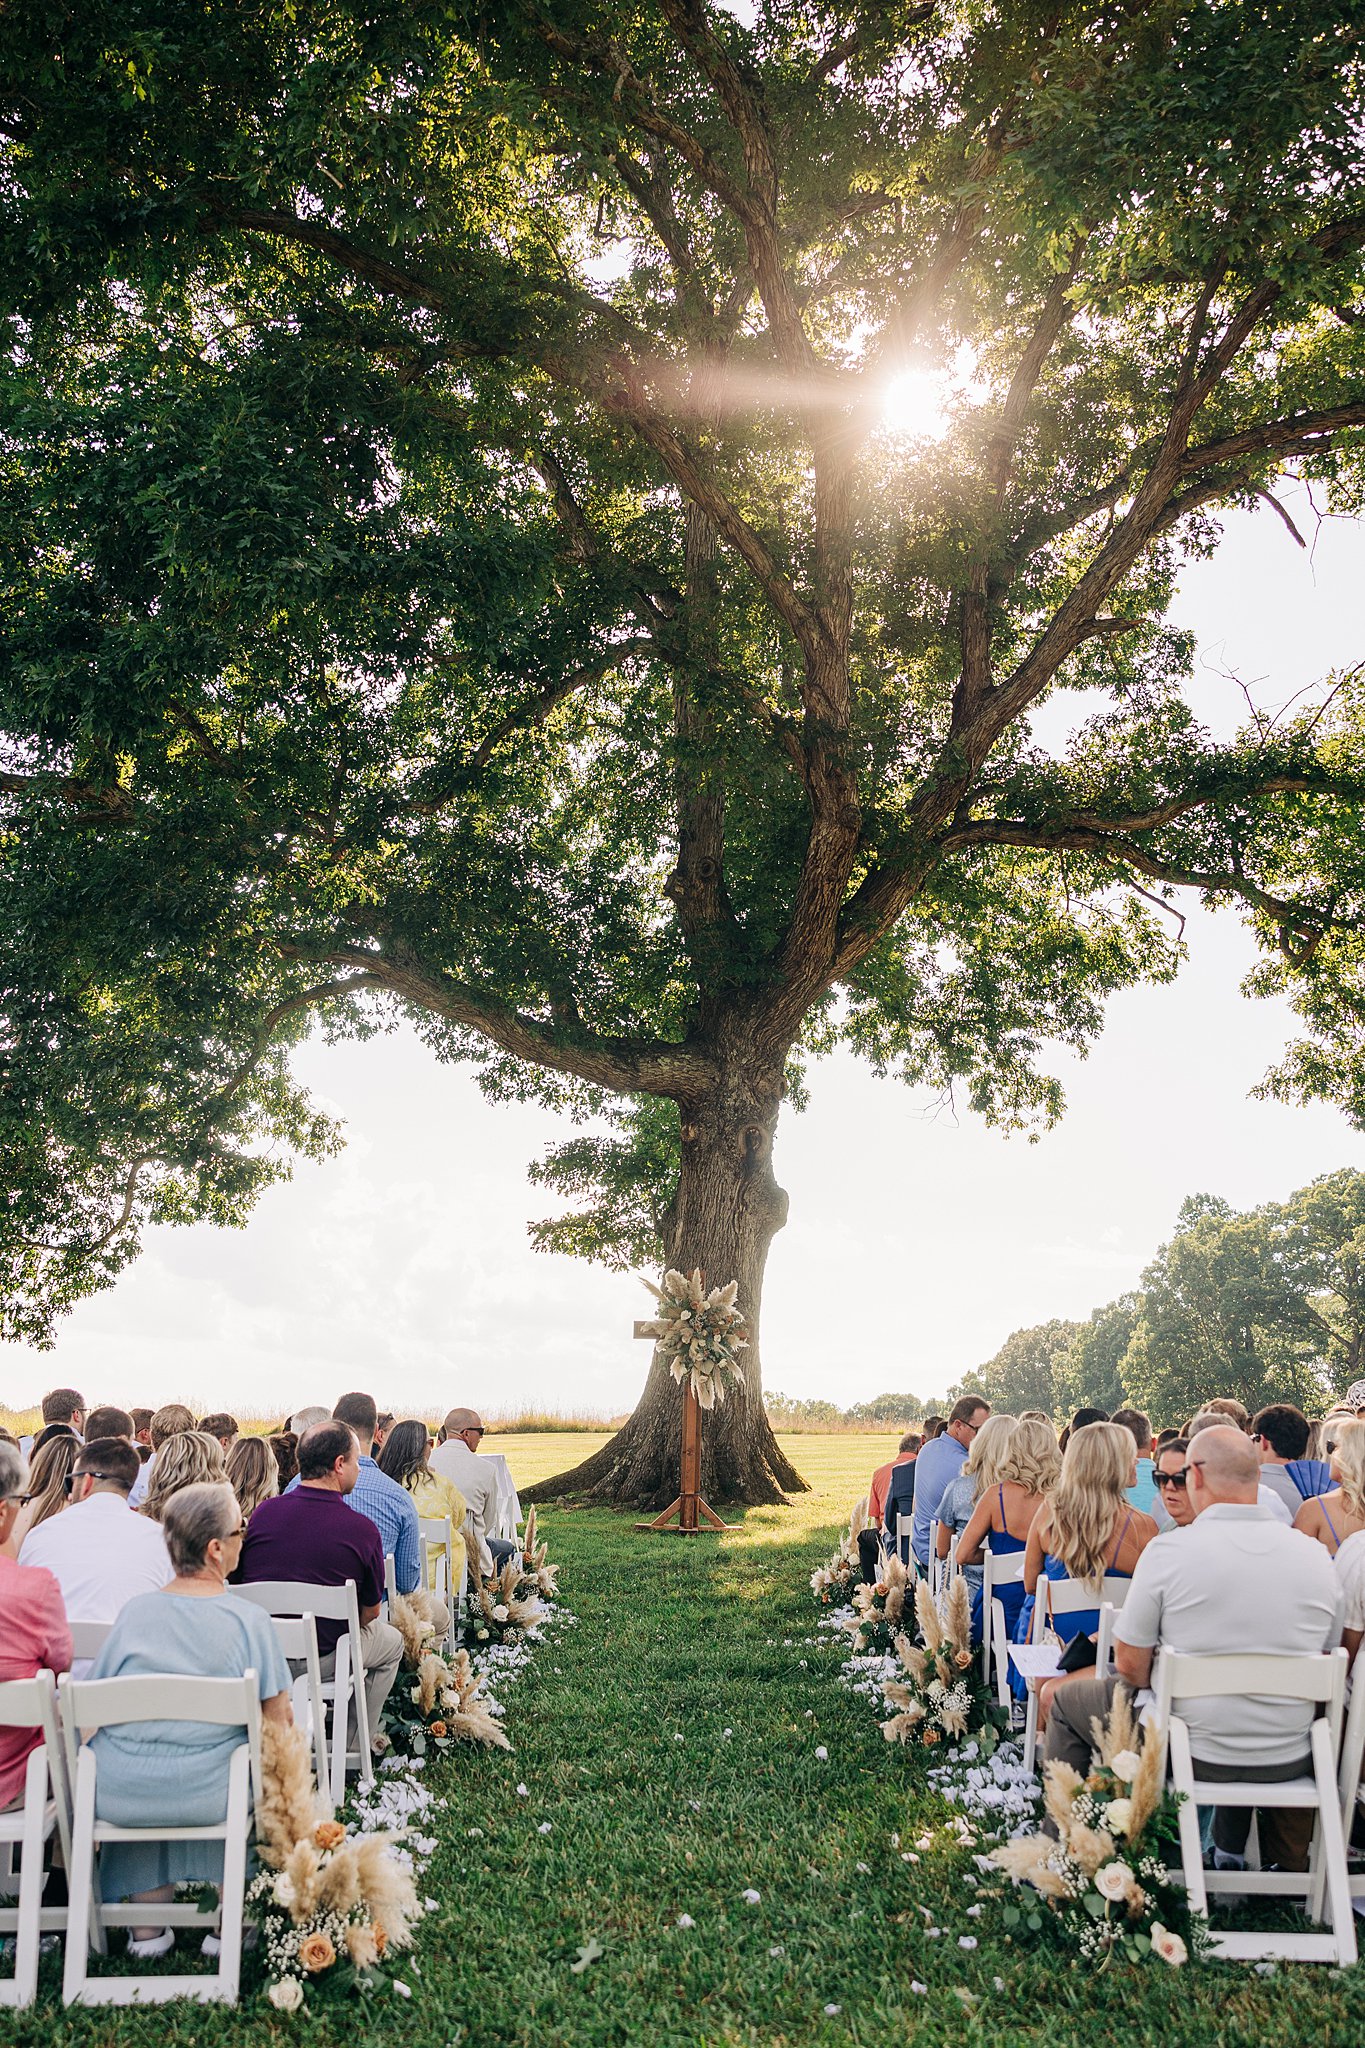 Details of wedding guests waiting for a Summerfield Farms wedding ceremony at sunset under a large oak tree